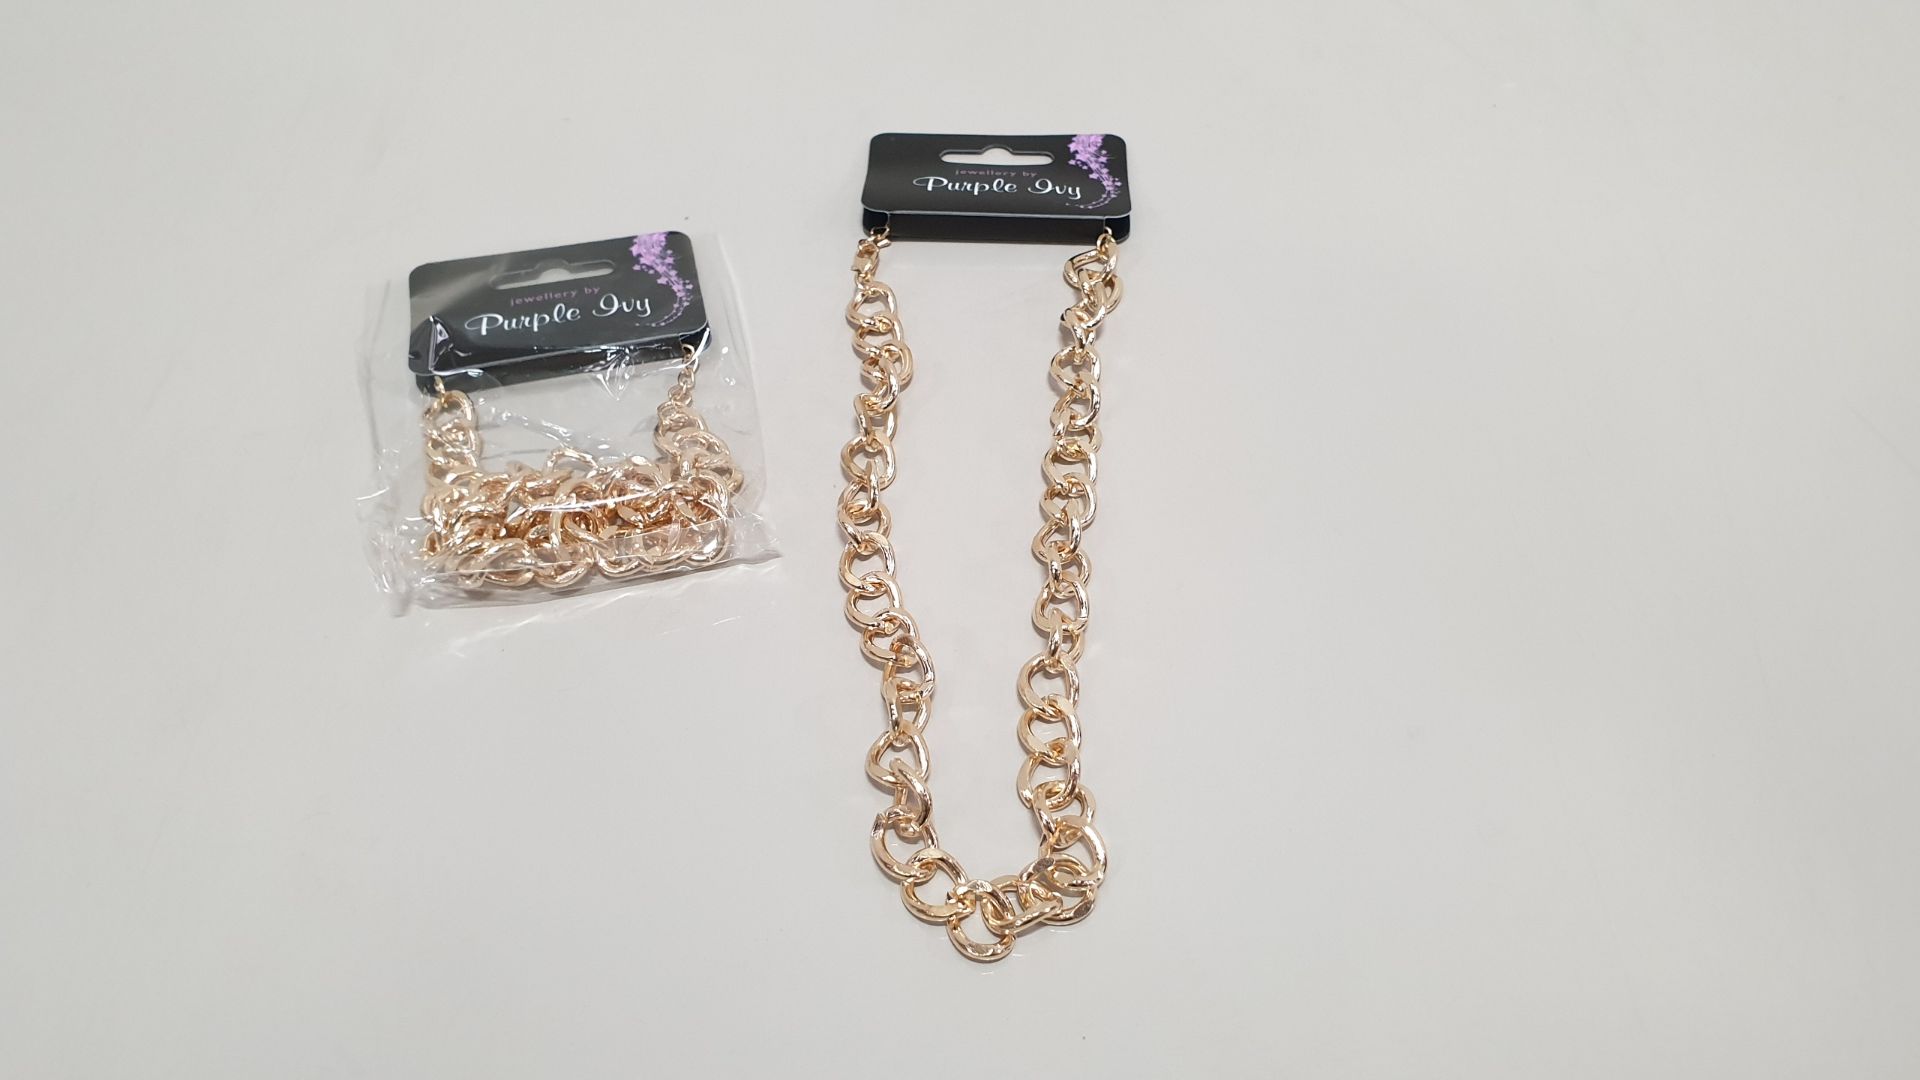 192 X BRAND NEW PURPLE IVY HEAVY GOLD COLOURED CHAIN/ KNECKLACE IN 4 BOXES